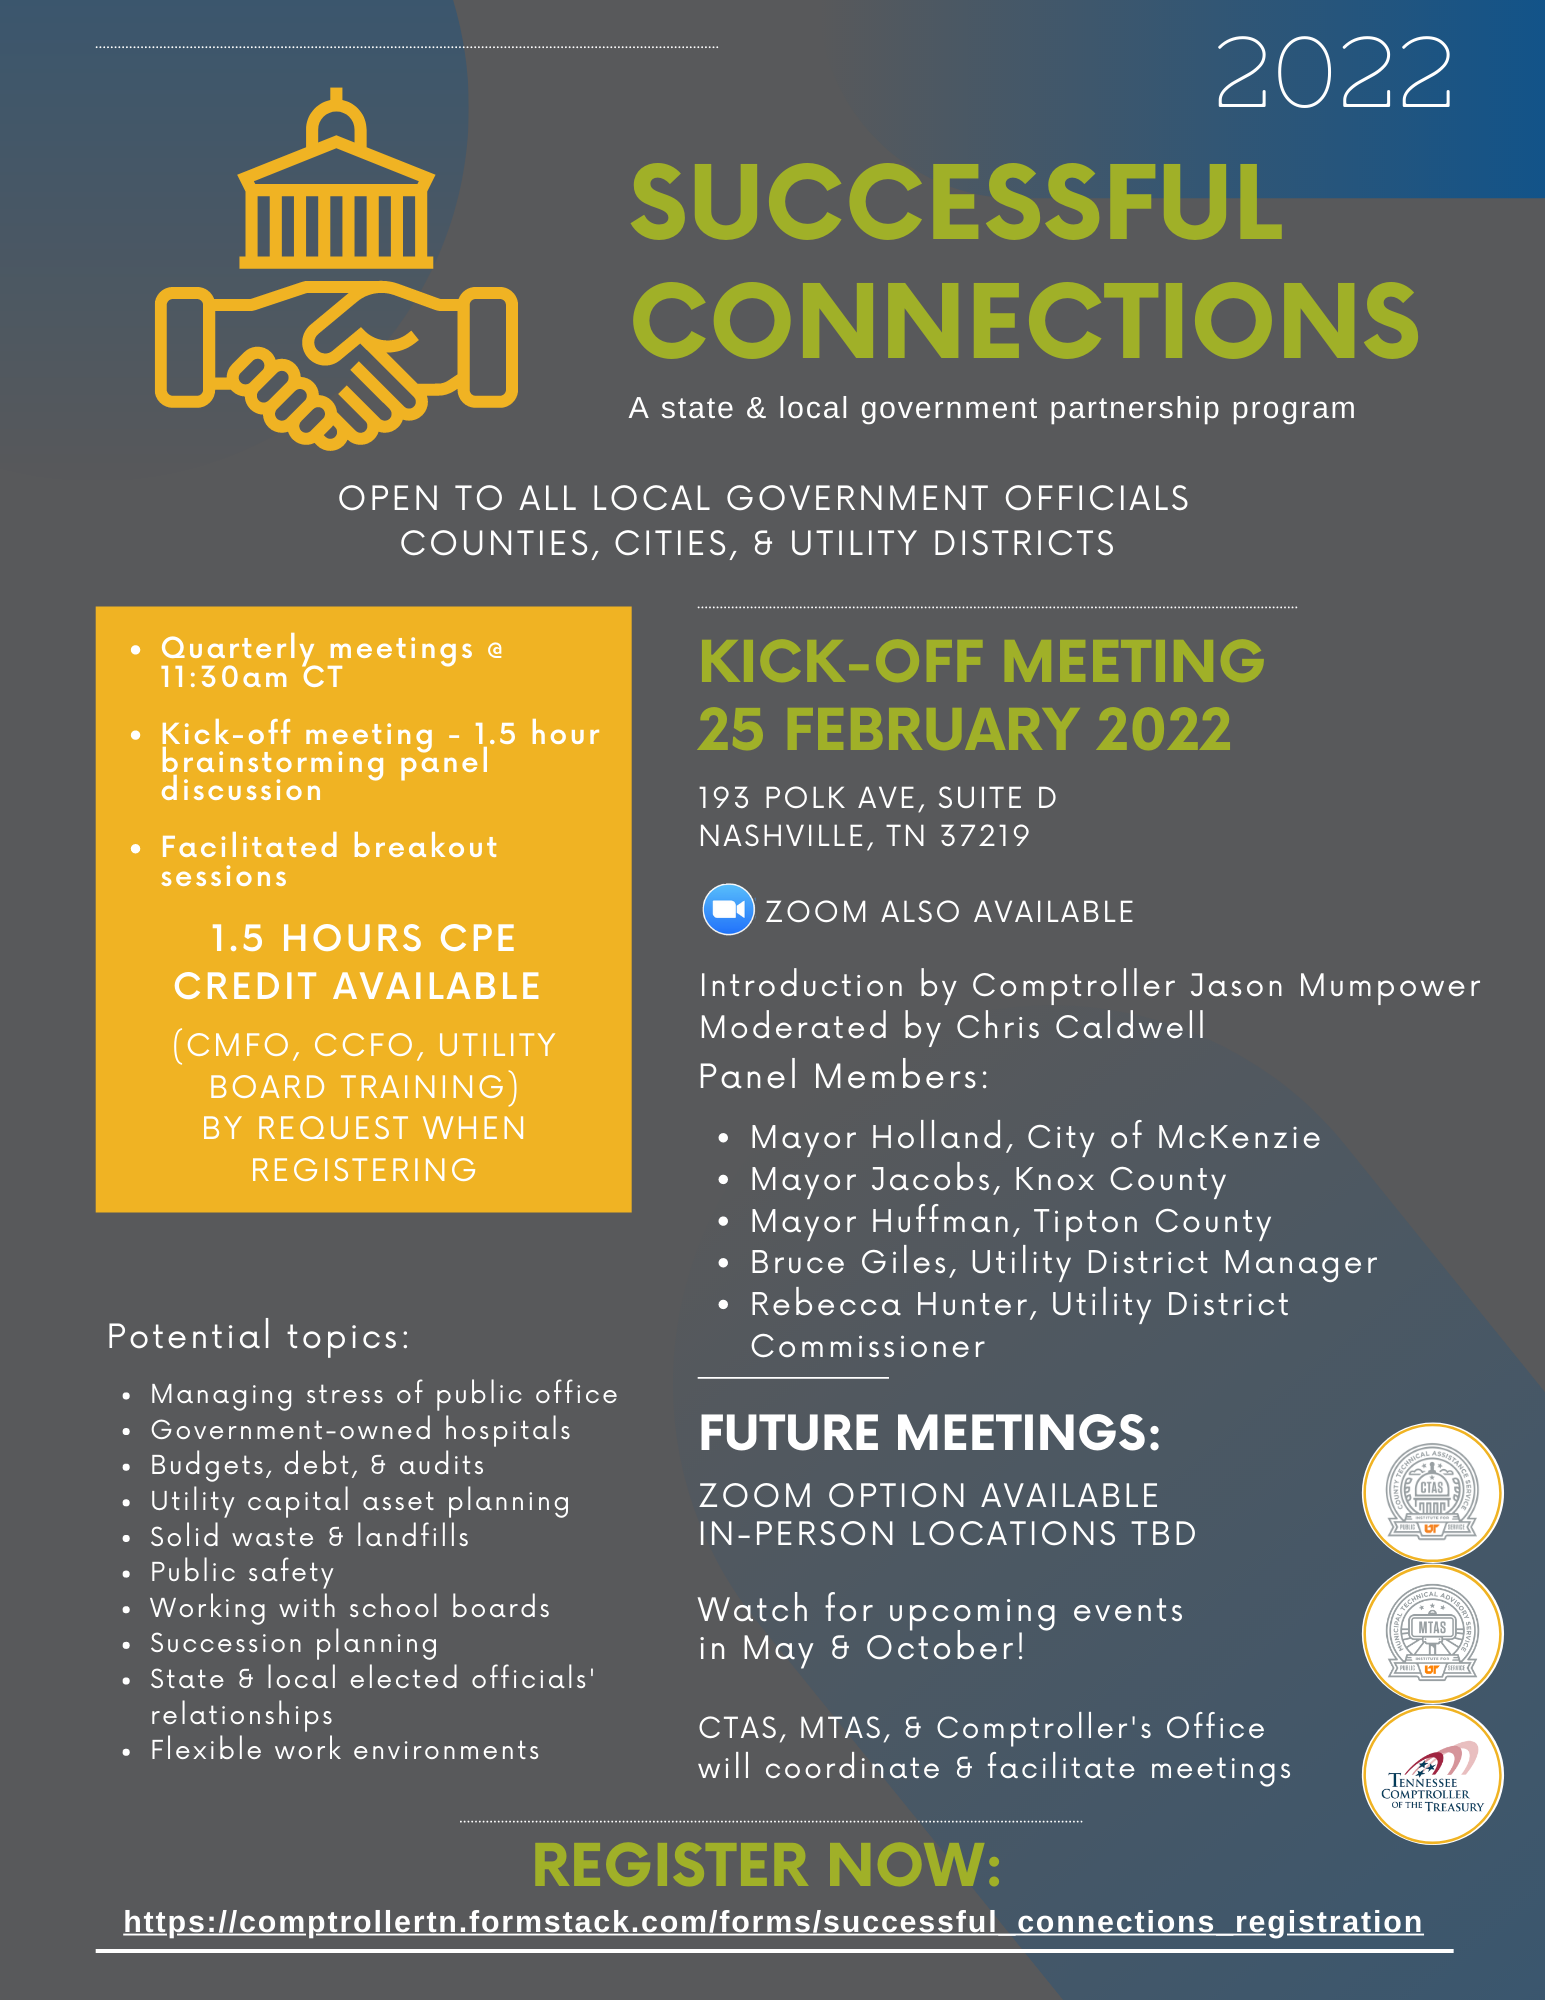 Flyer with information about the Successful Connections program